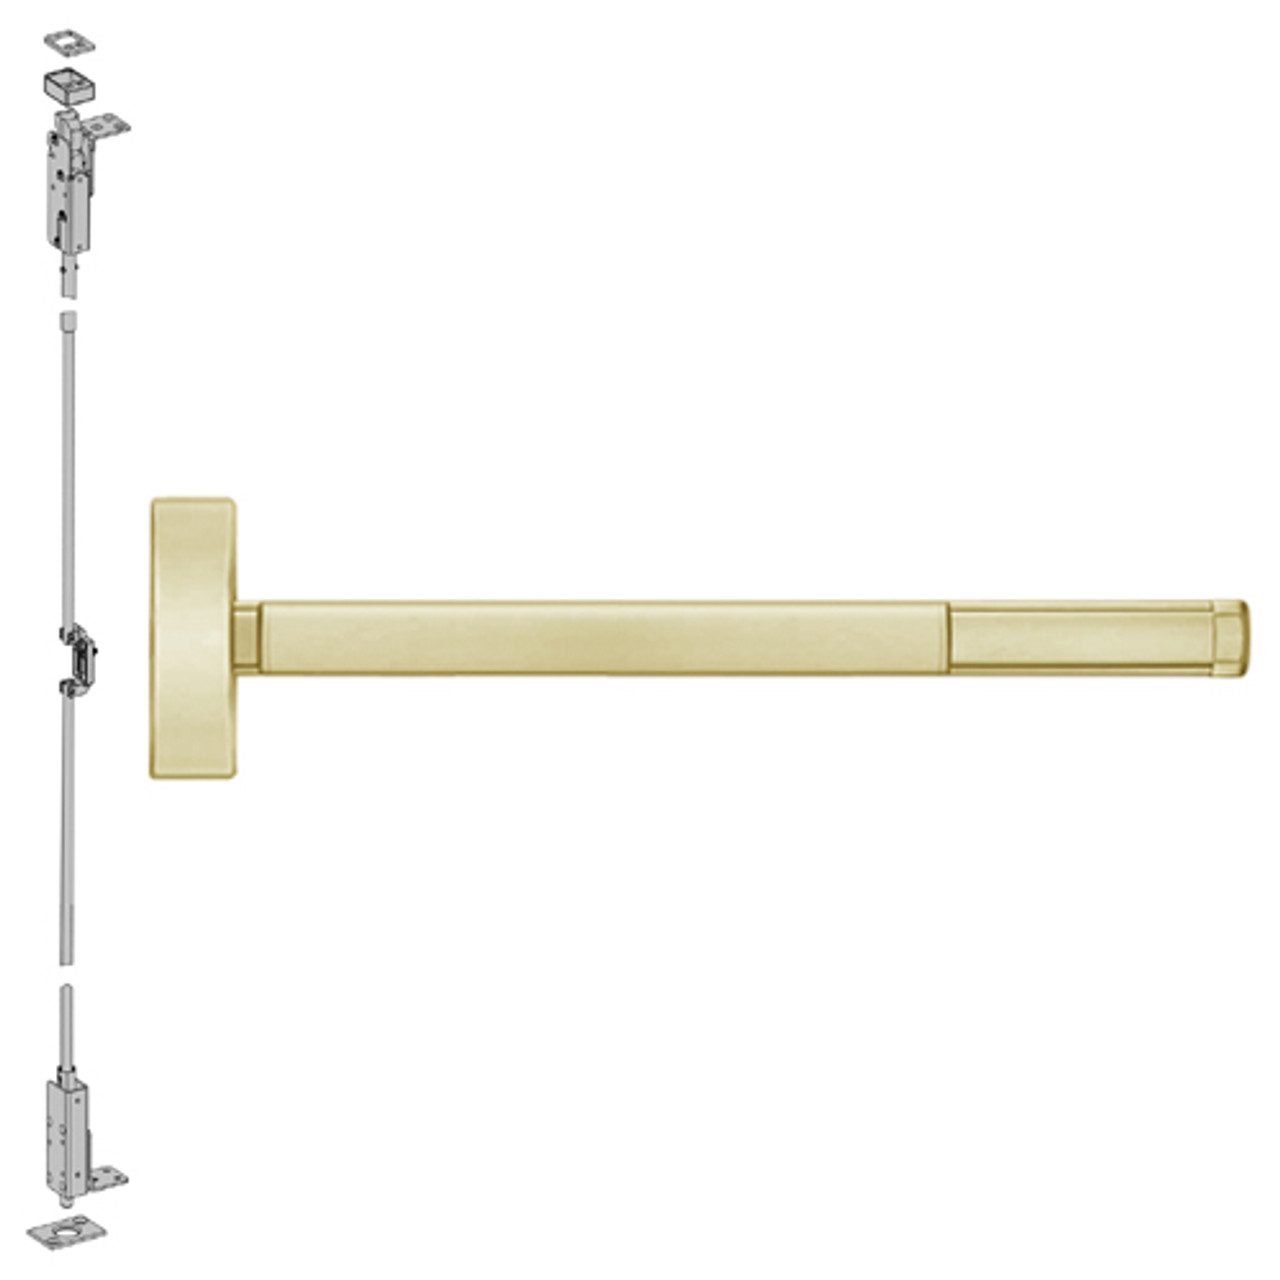 DEFL2705LBR-606-48 PHI 2700 Series Fire Rated Wood Door Concealed Vertical Exit Device with Delayed Egress Prepped for Key Controls Thumb Piece in Satin Brass Finish